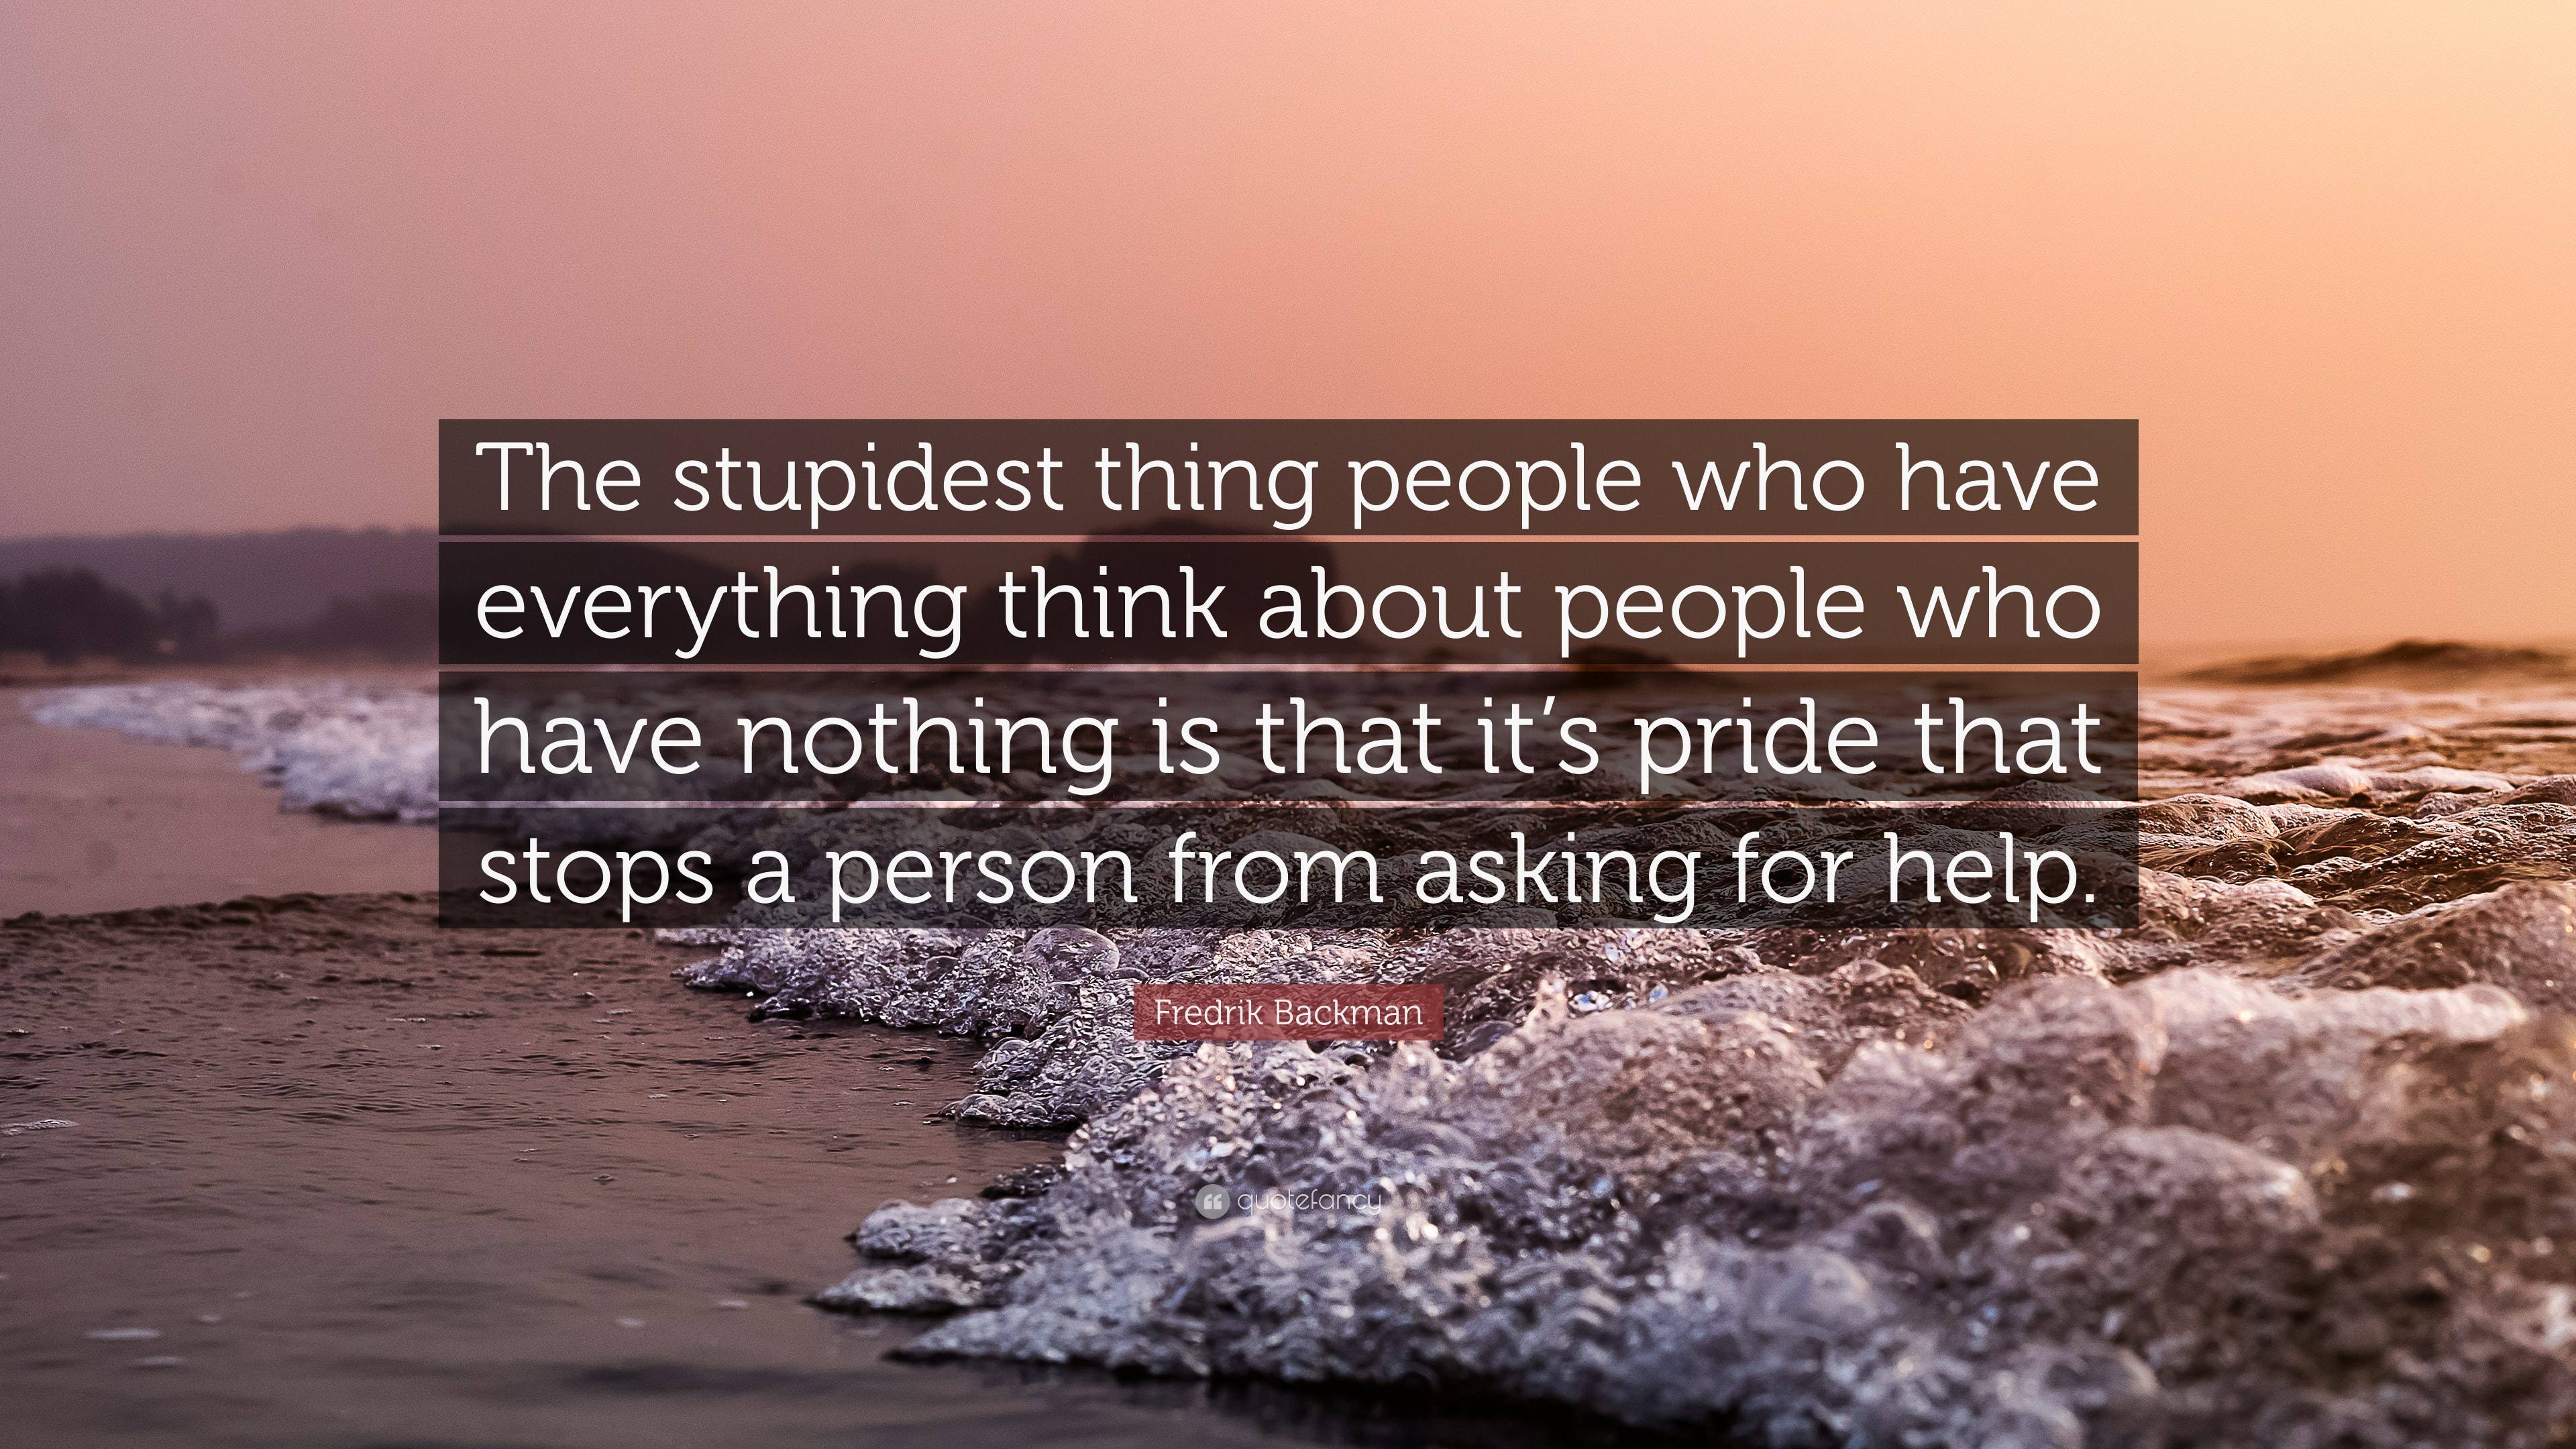 Fredrik Backman Quote: “The stupidest thing people who have everything ...